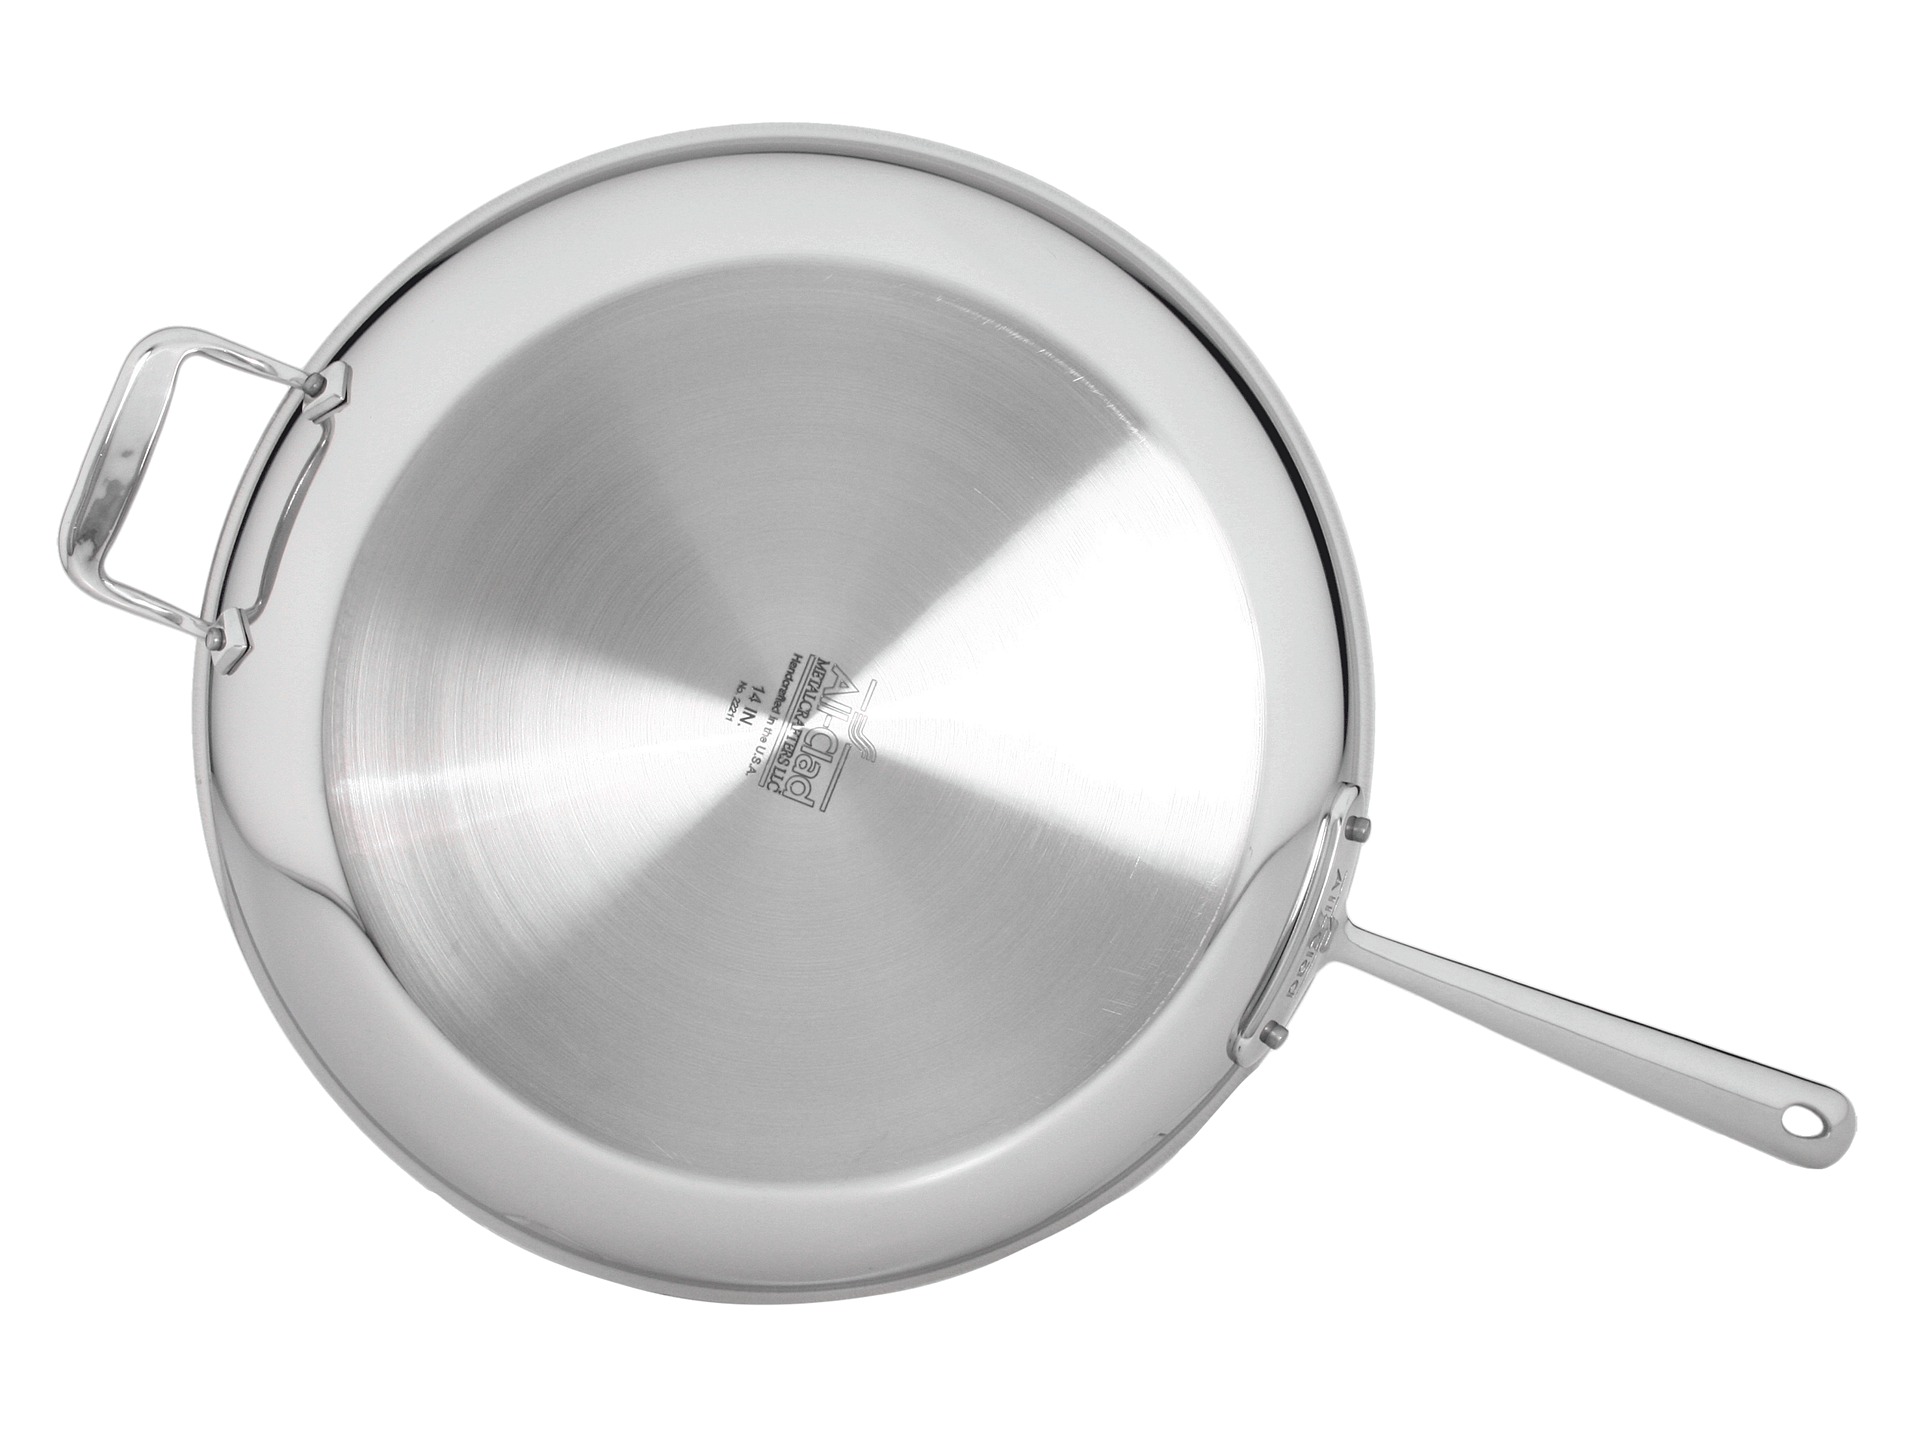 All Clad Stainless Steel Non Stick 14 Fry Pan | Shipped Free at Zappos